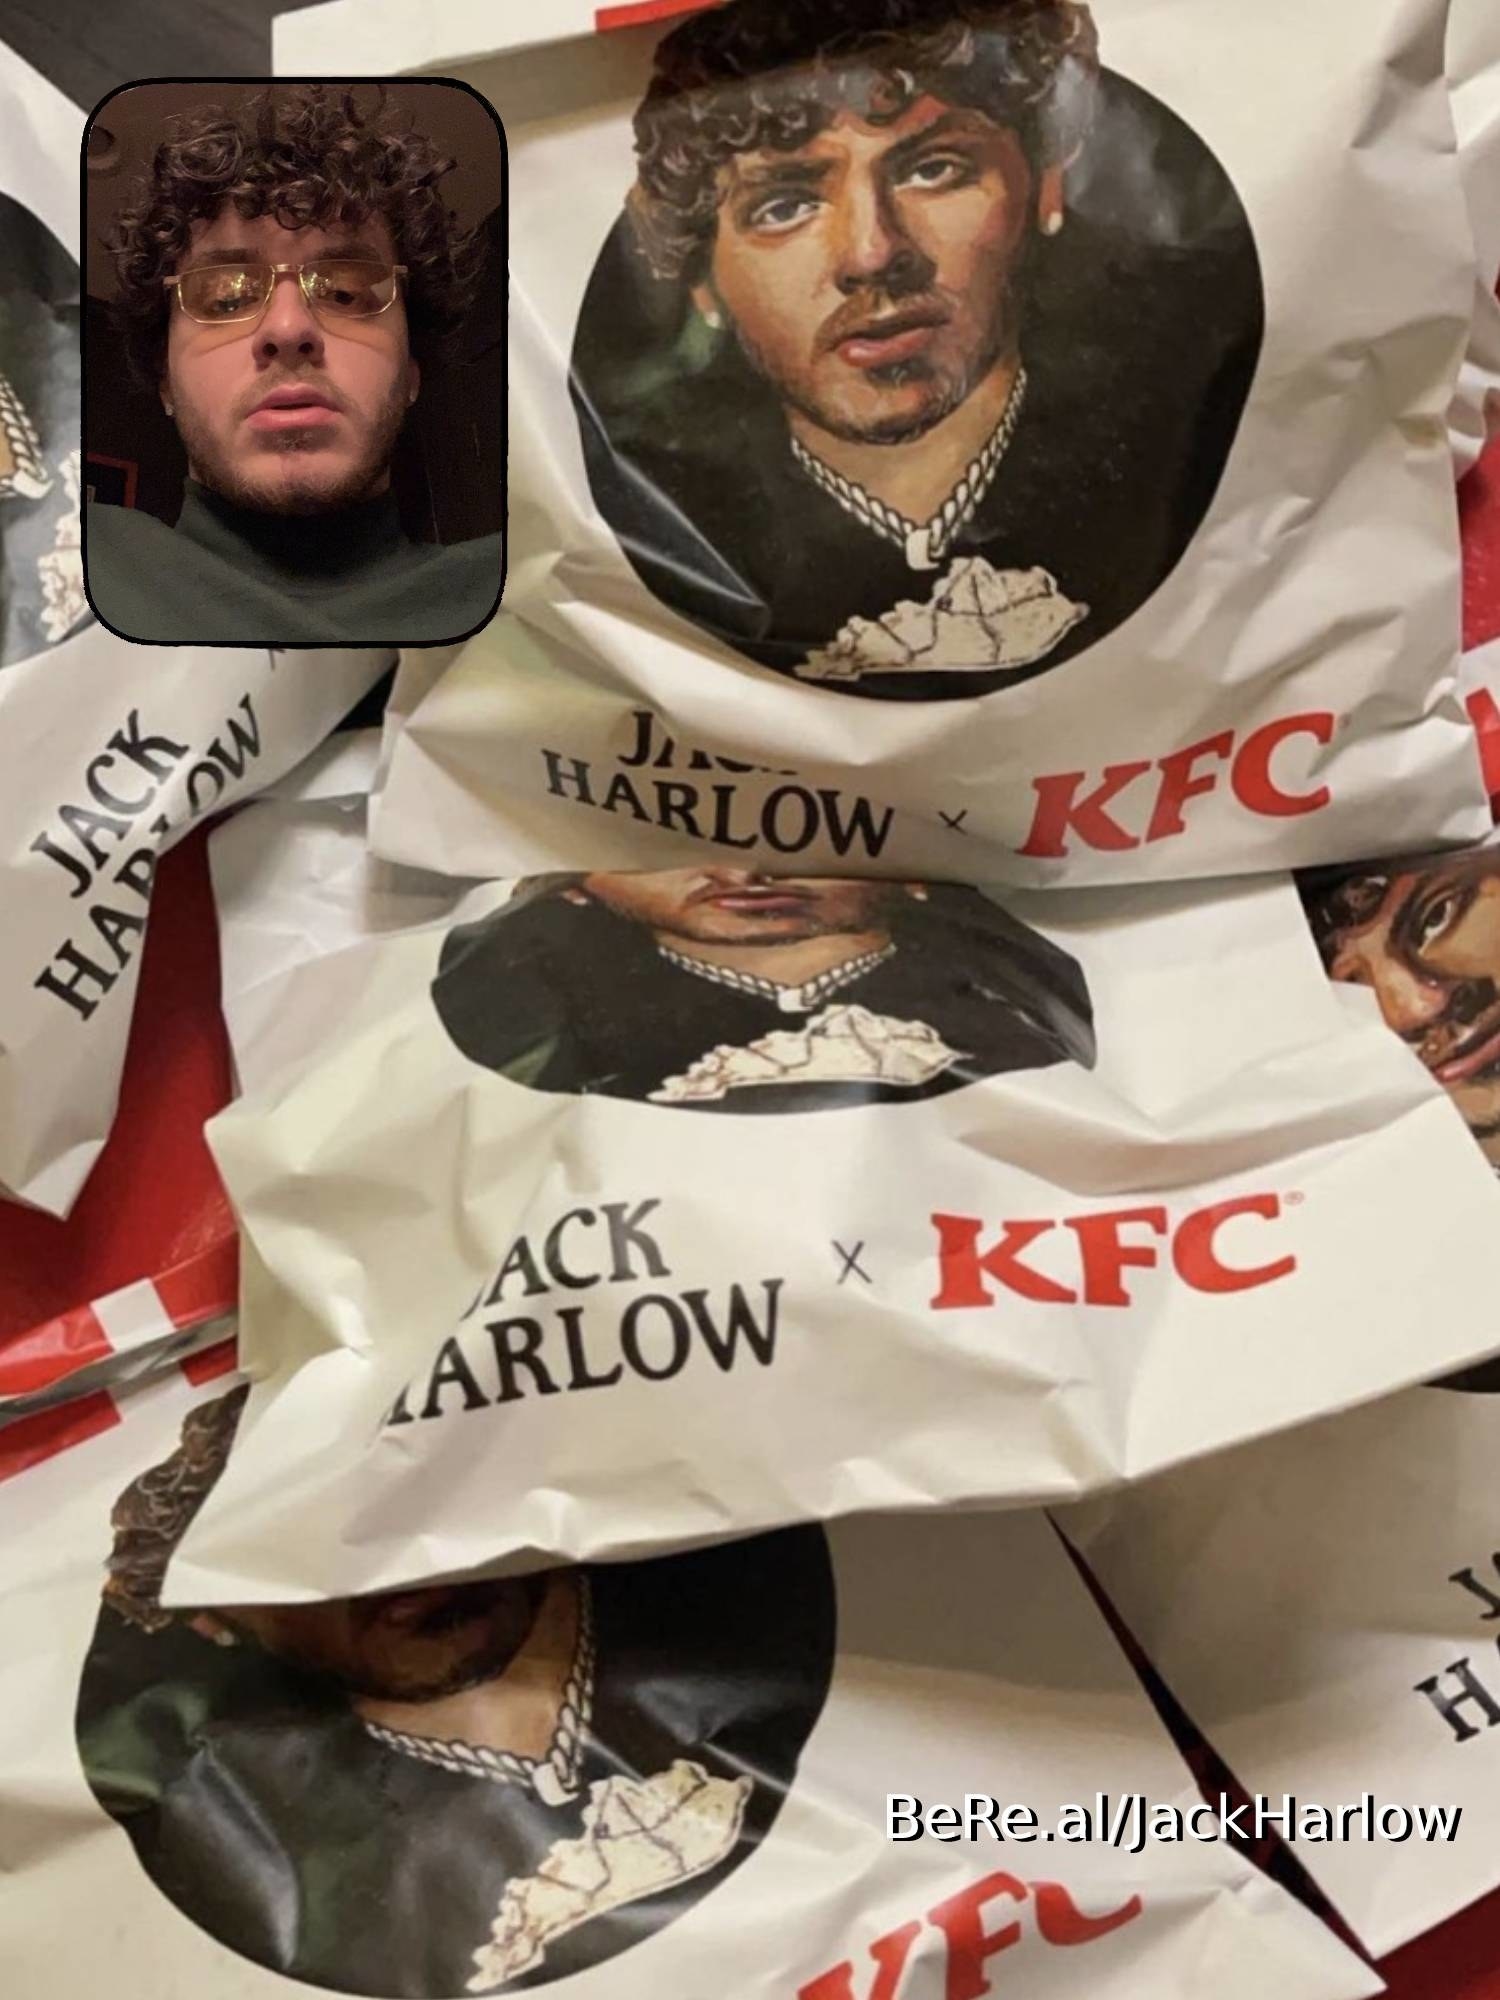 Jack Harlow with a pile of Jack Harlow KFC meals